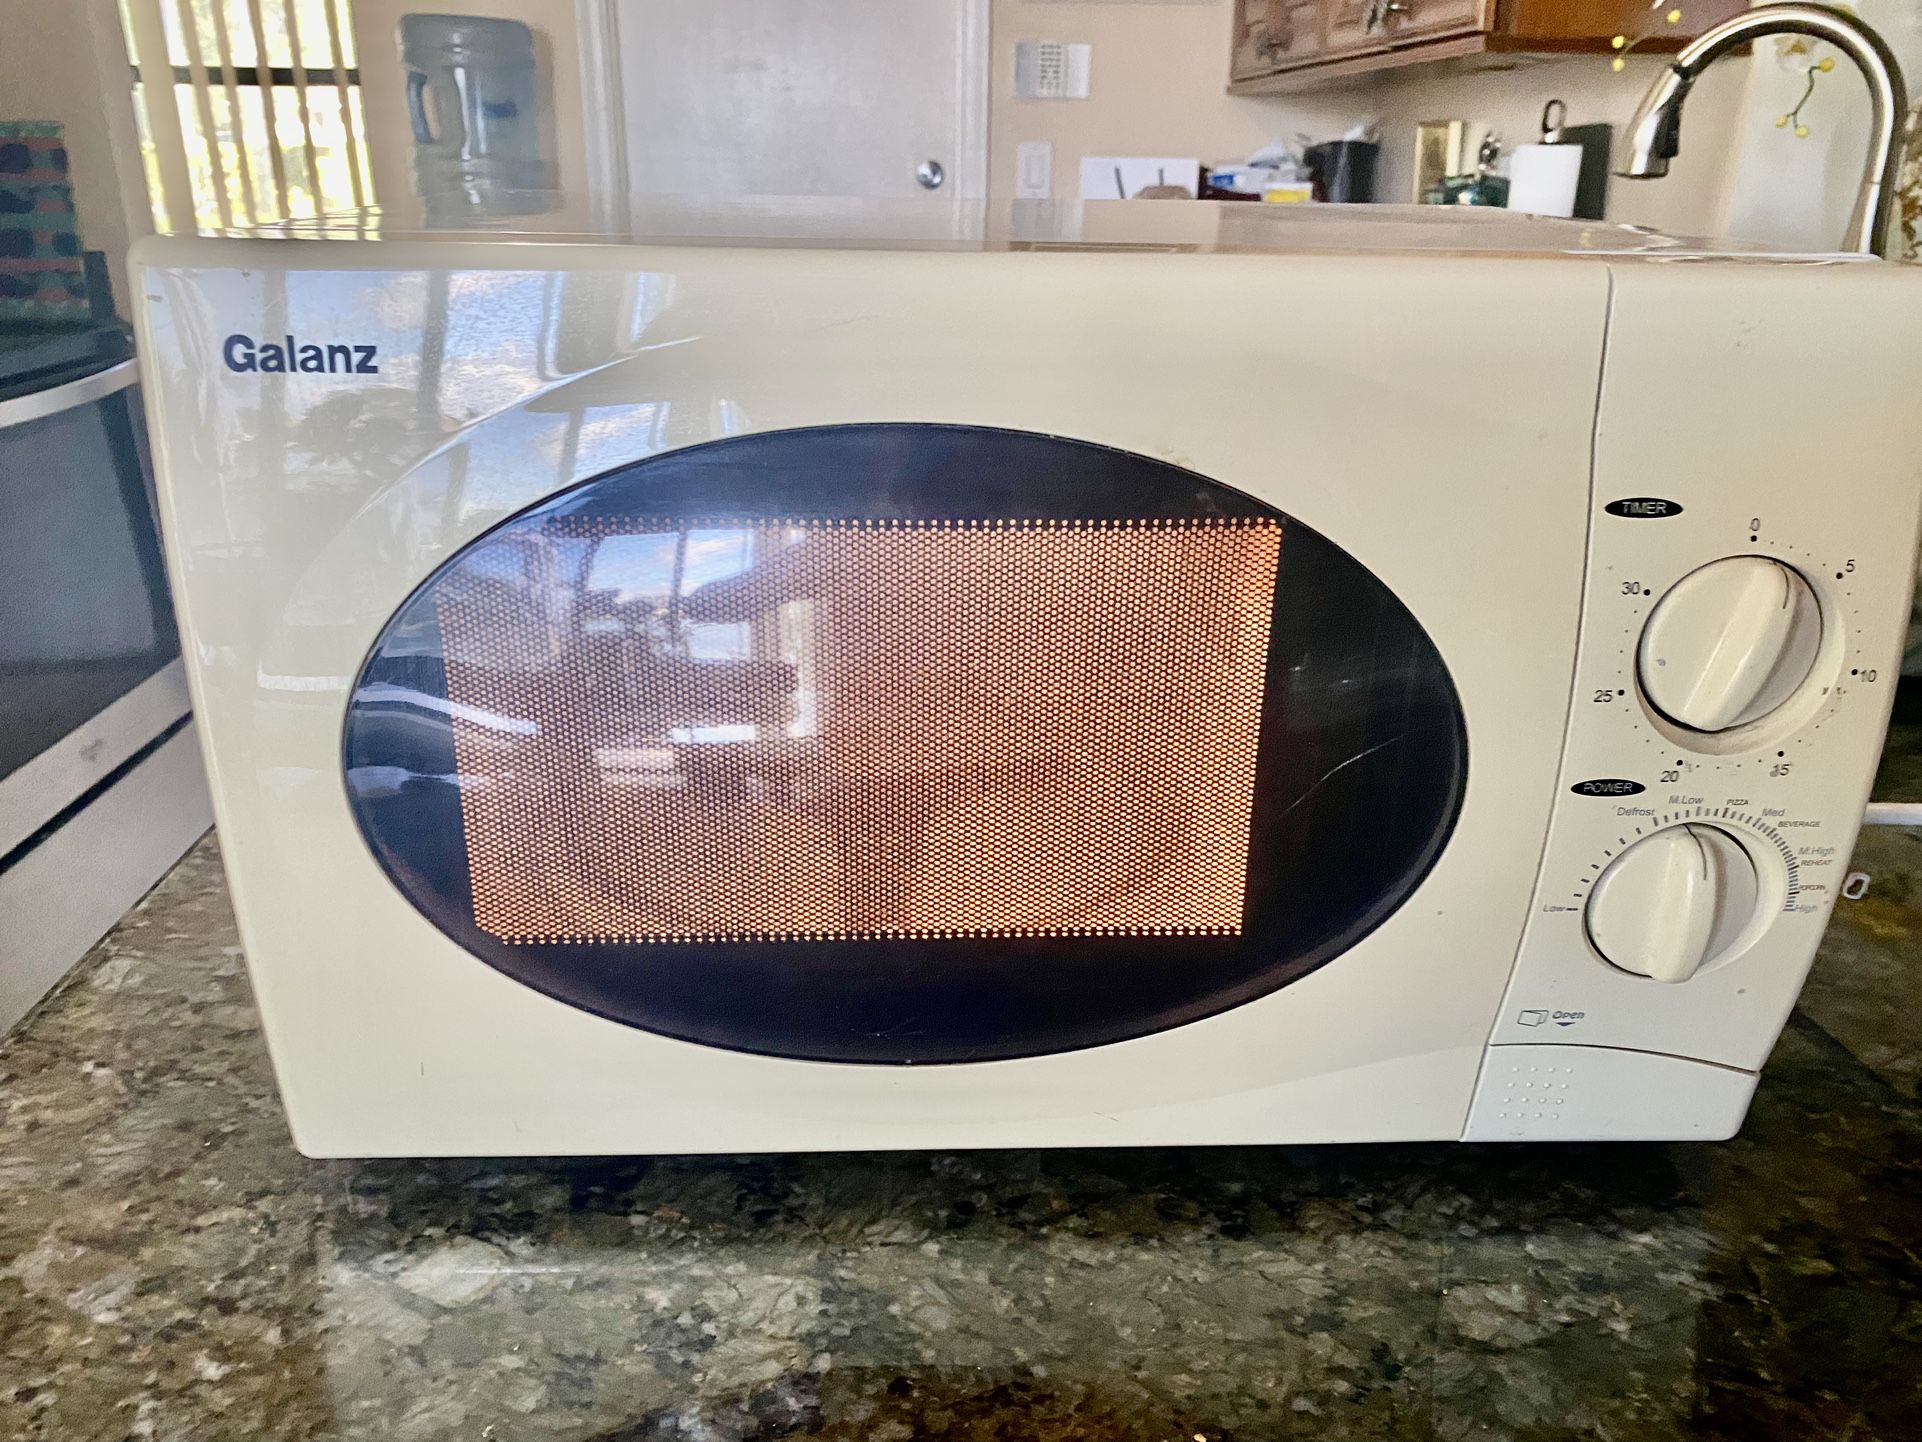 Microwave oven, portable dishwasher, Fountain